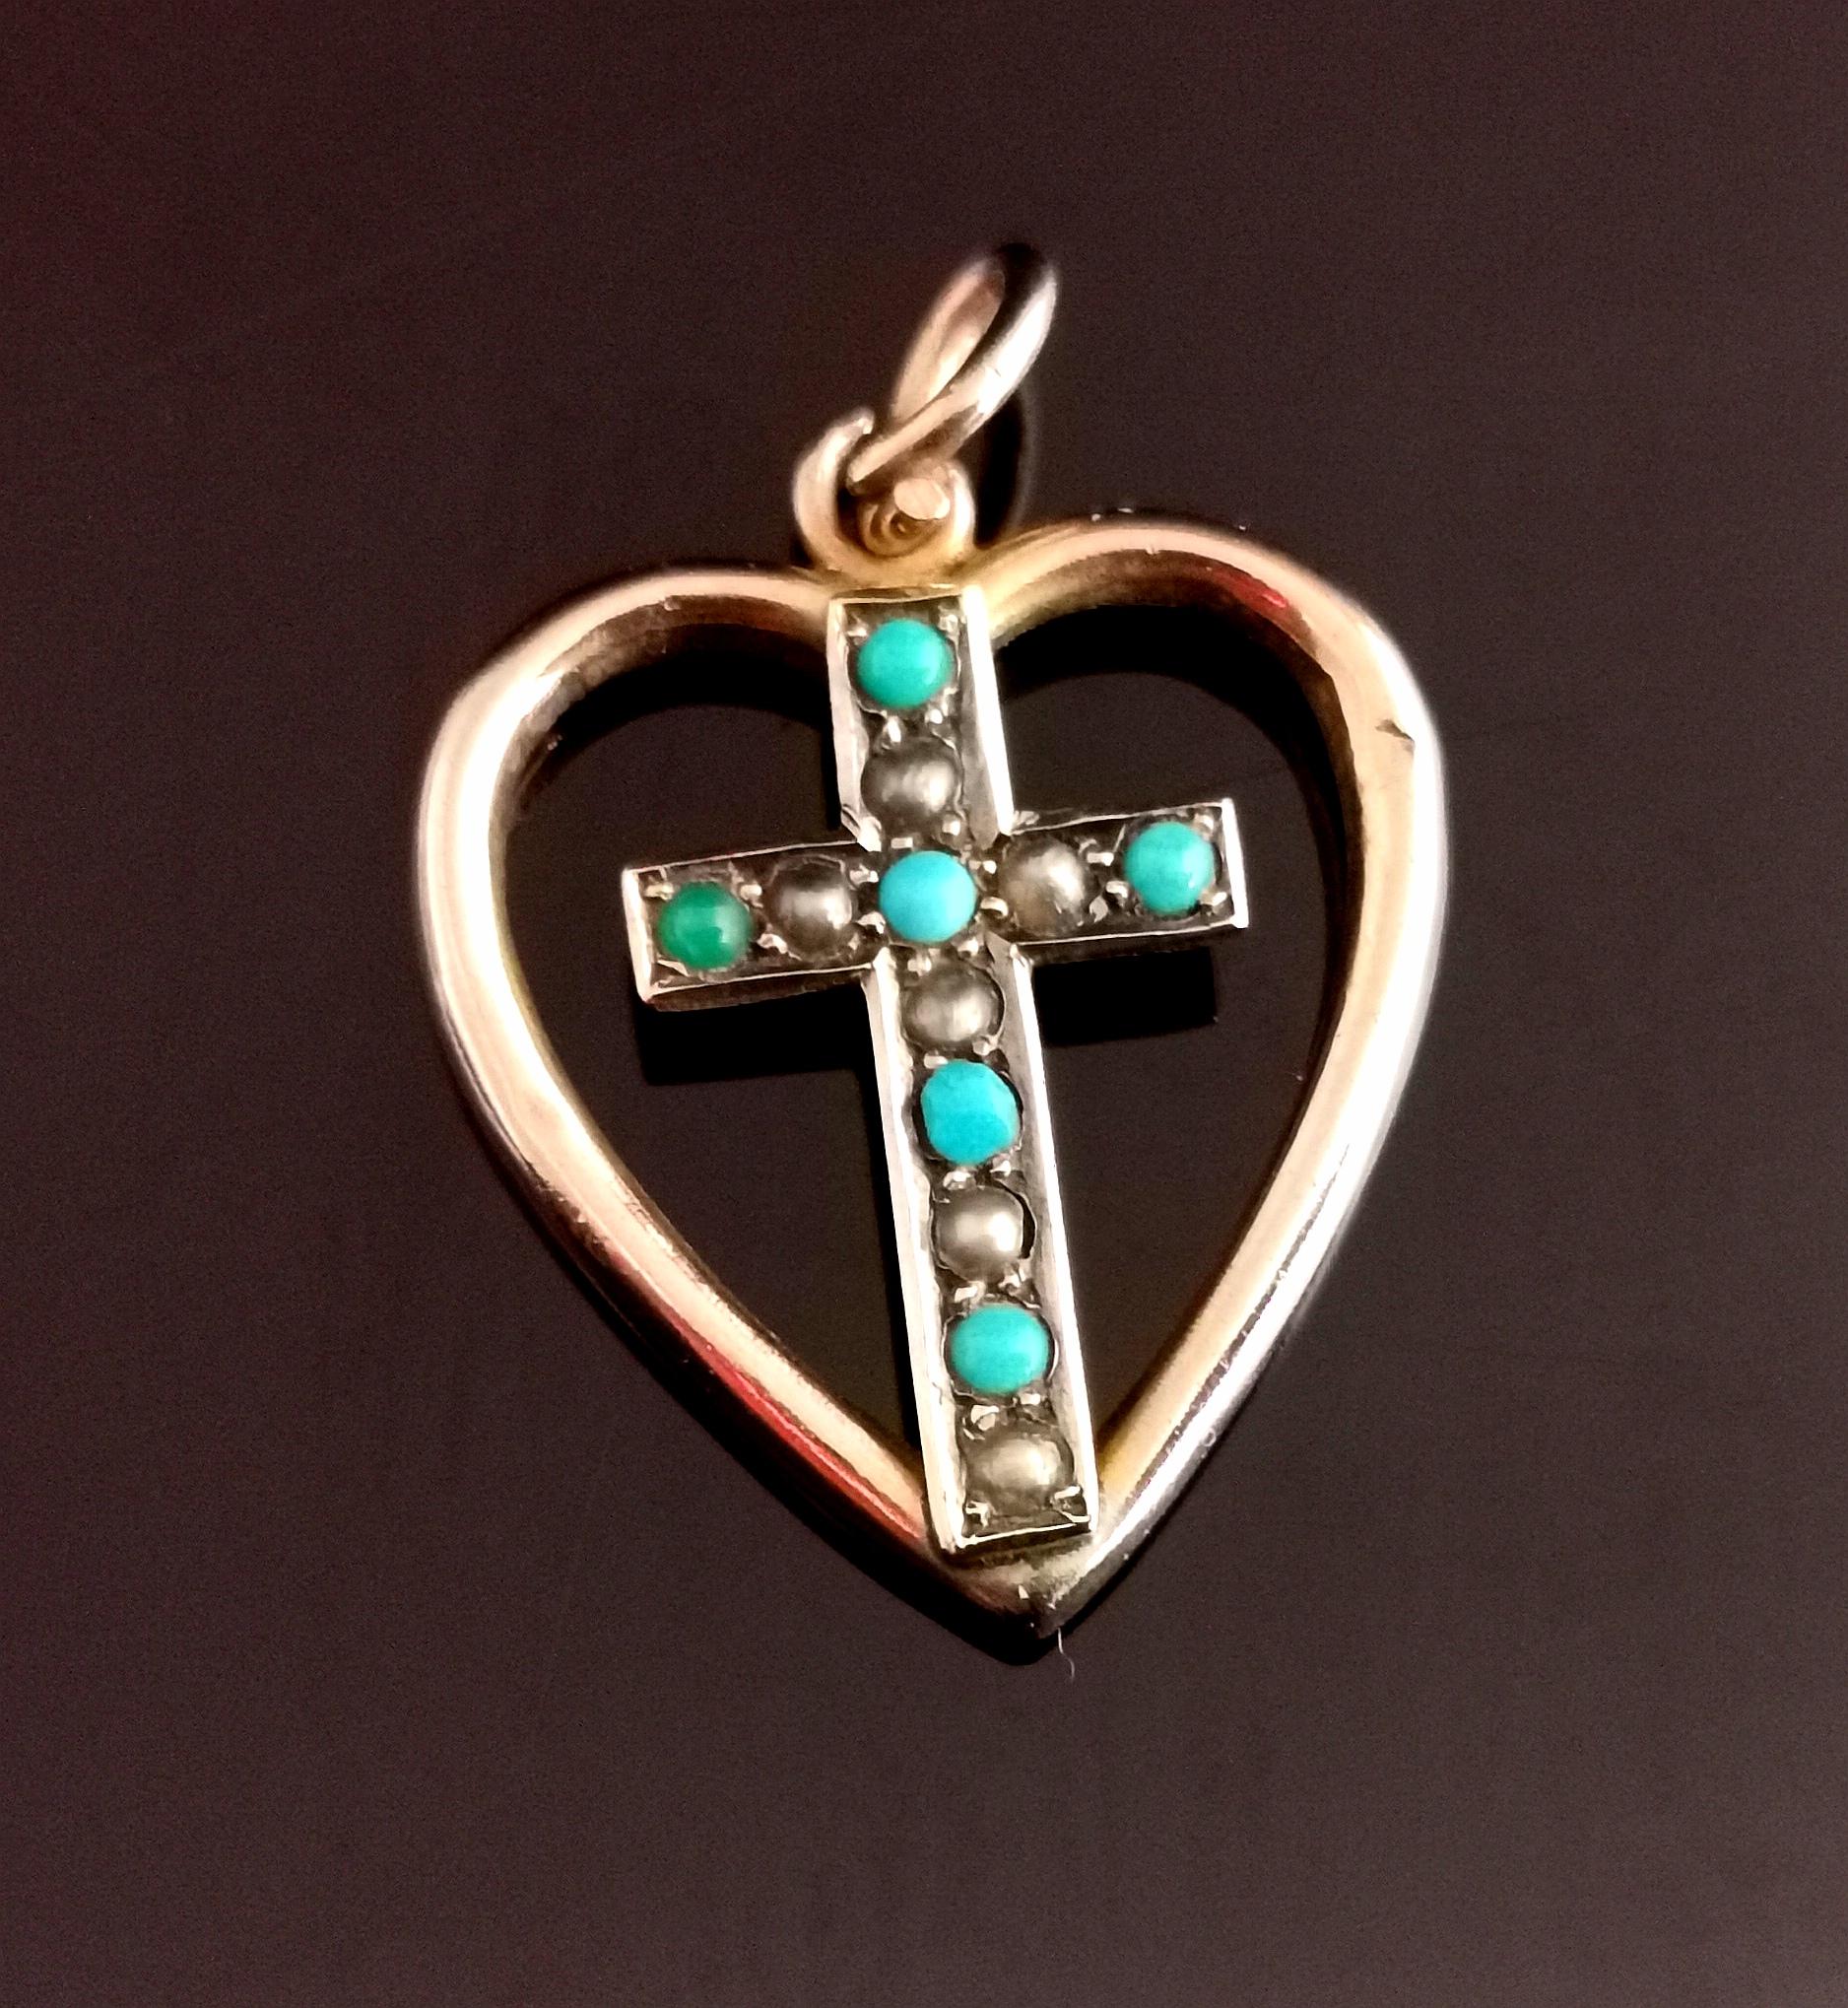 Antique Heart and Cross Pendant, 9k Rose Gold, Turquoise and Seed Pearl 7